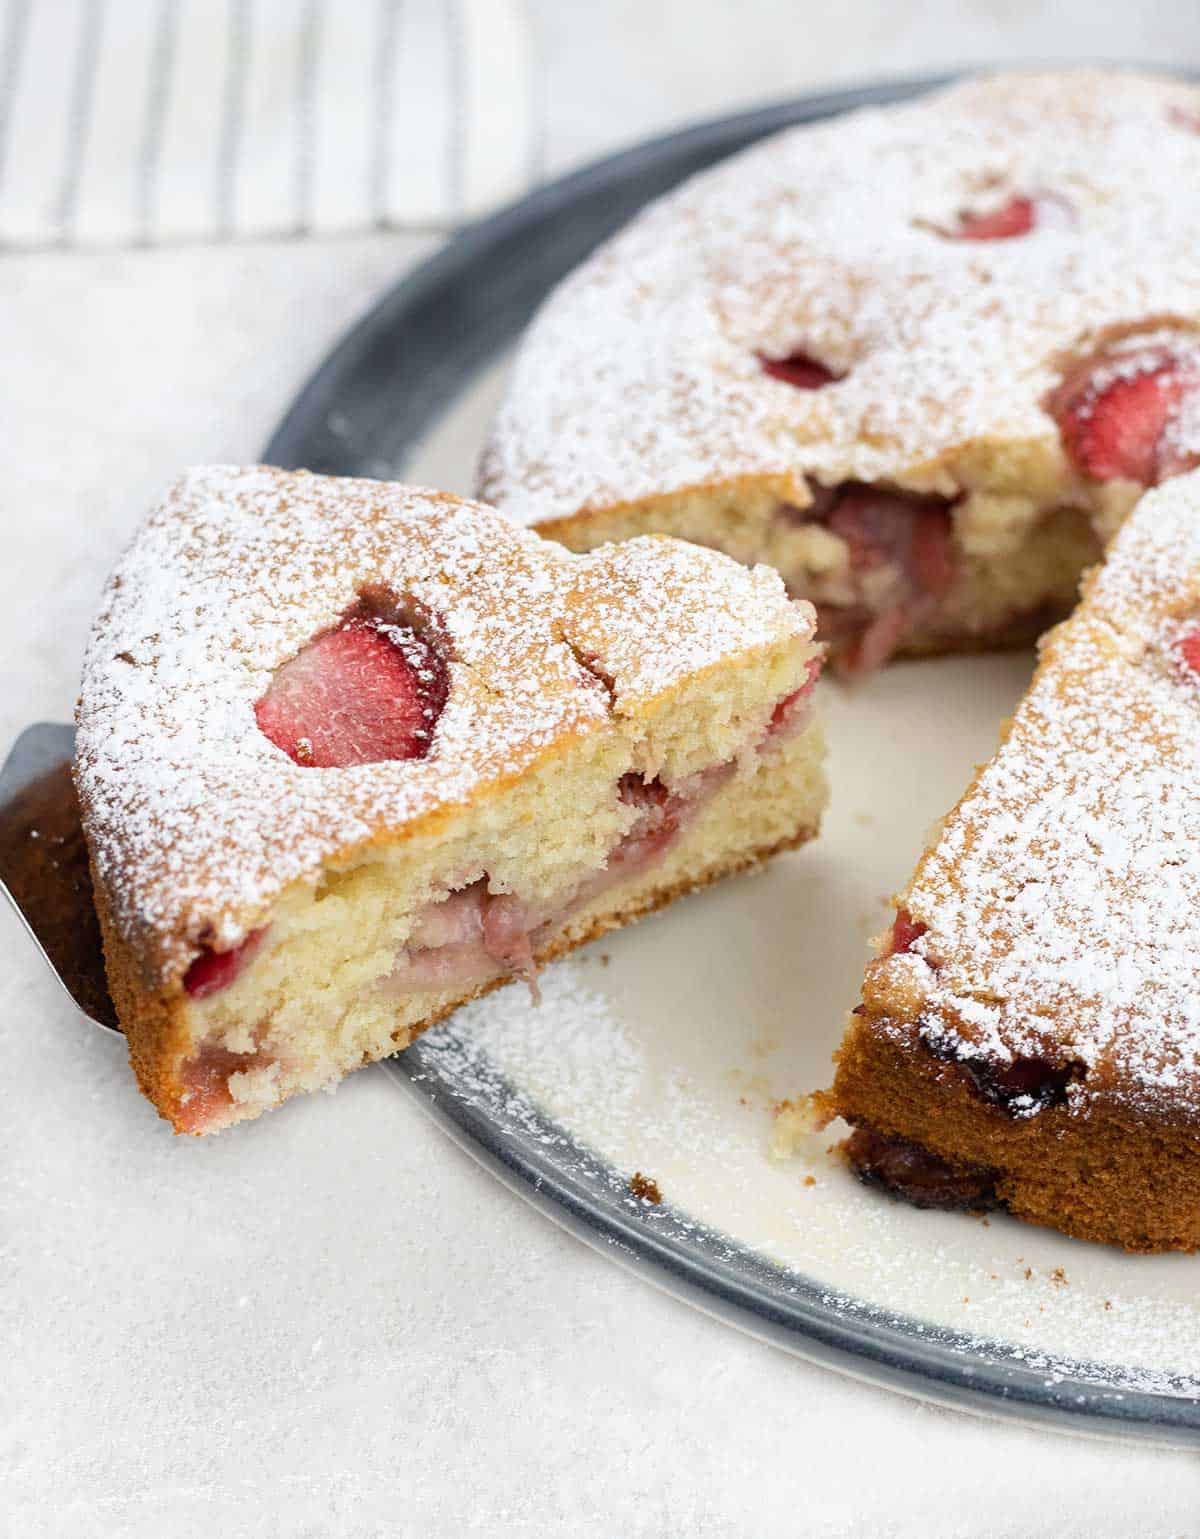 French Strawberry Cake slice topped with Strawberries and powdered sugar.